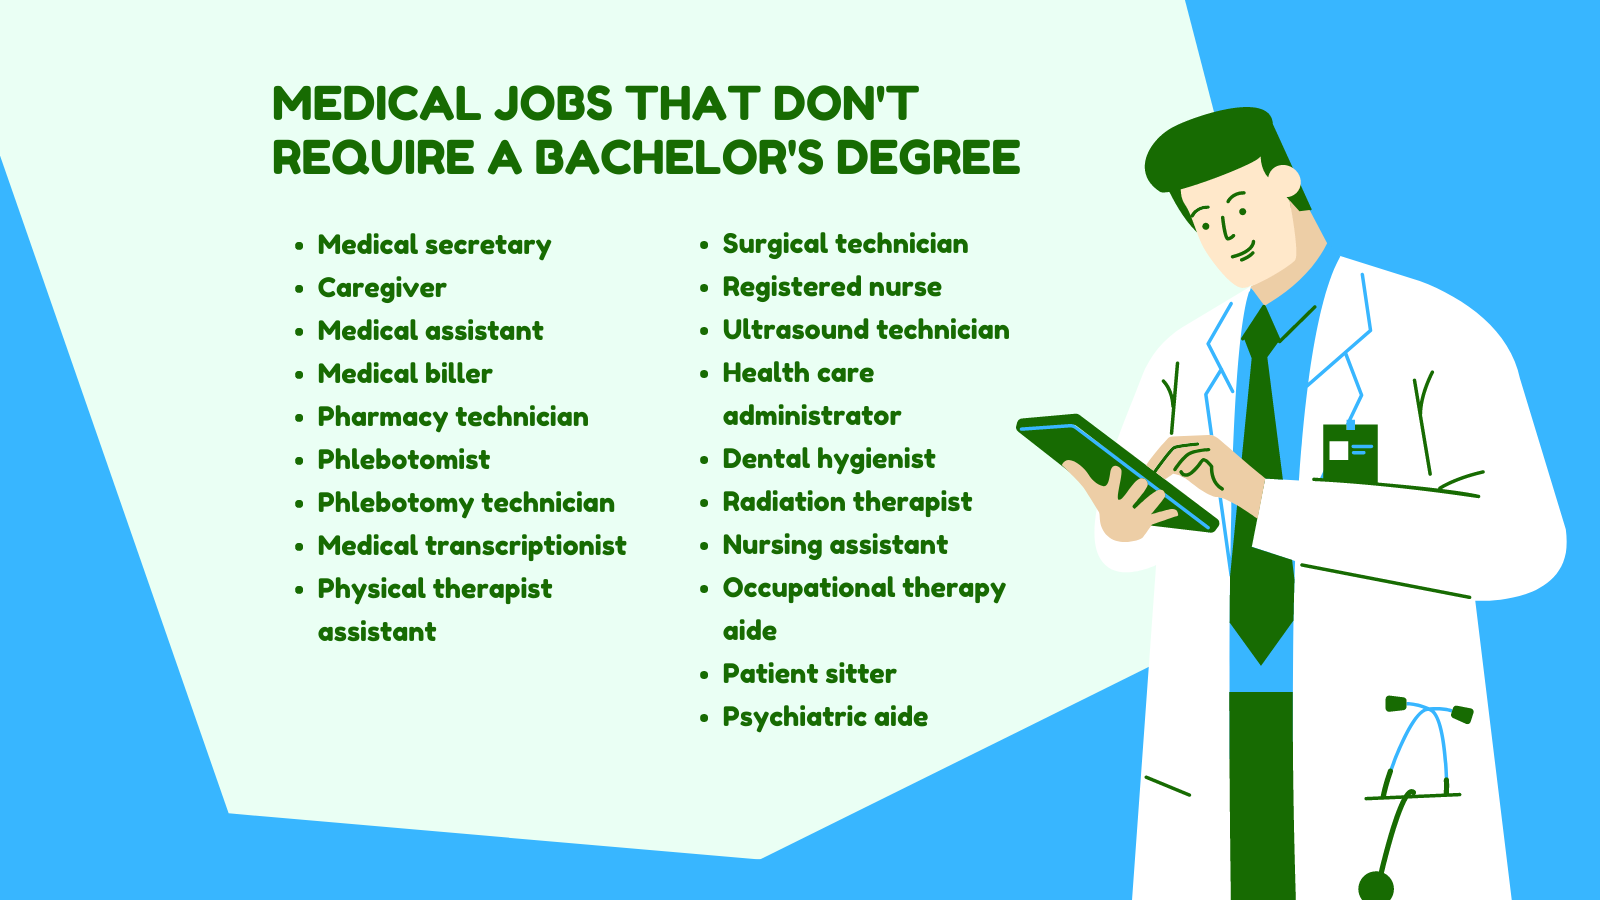 medical jobs that don't require a bachelor's degree usher khan